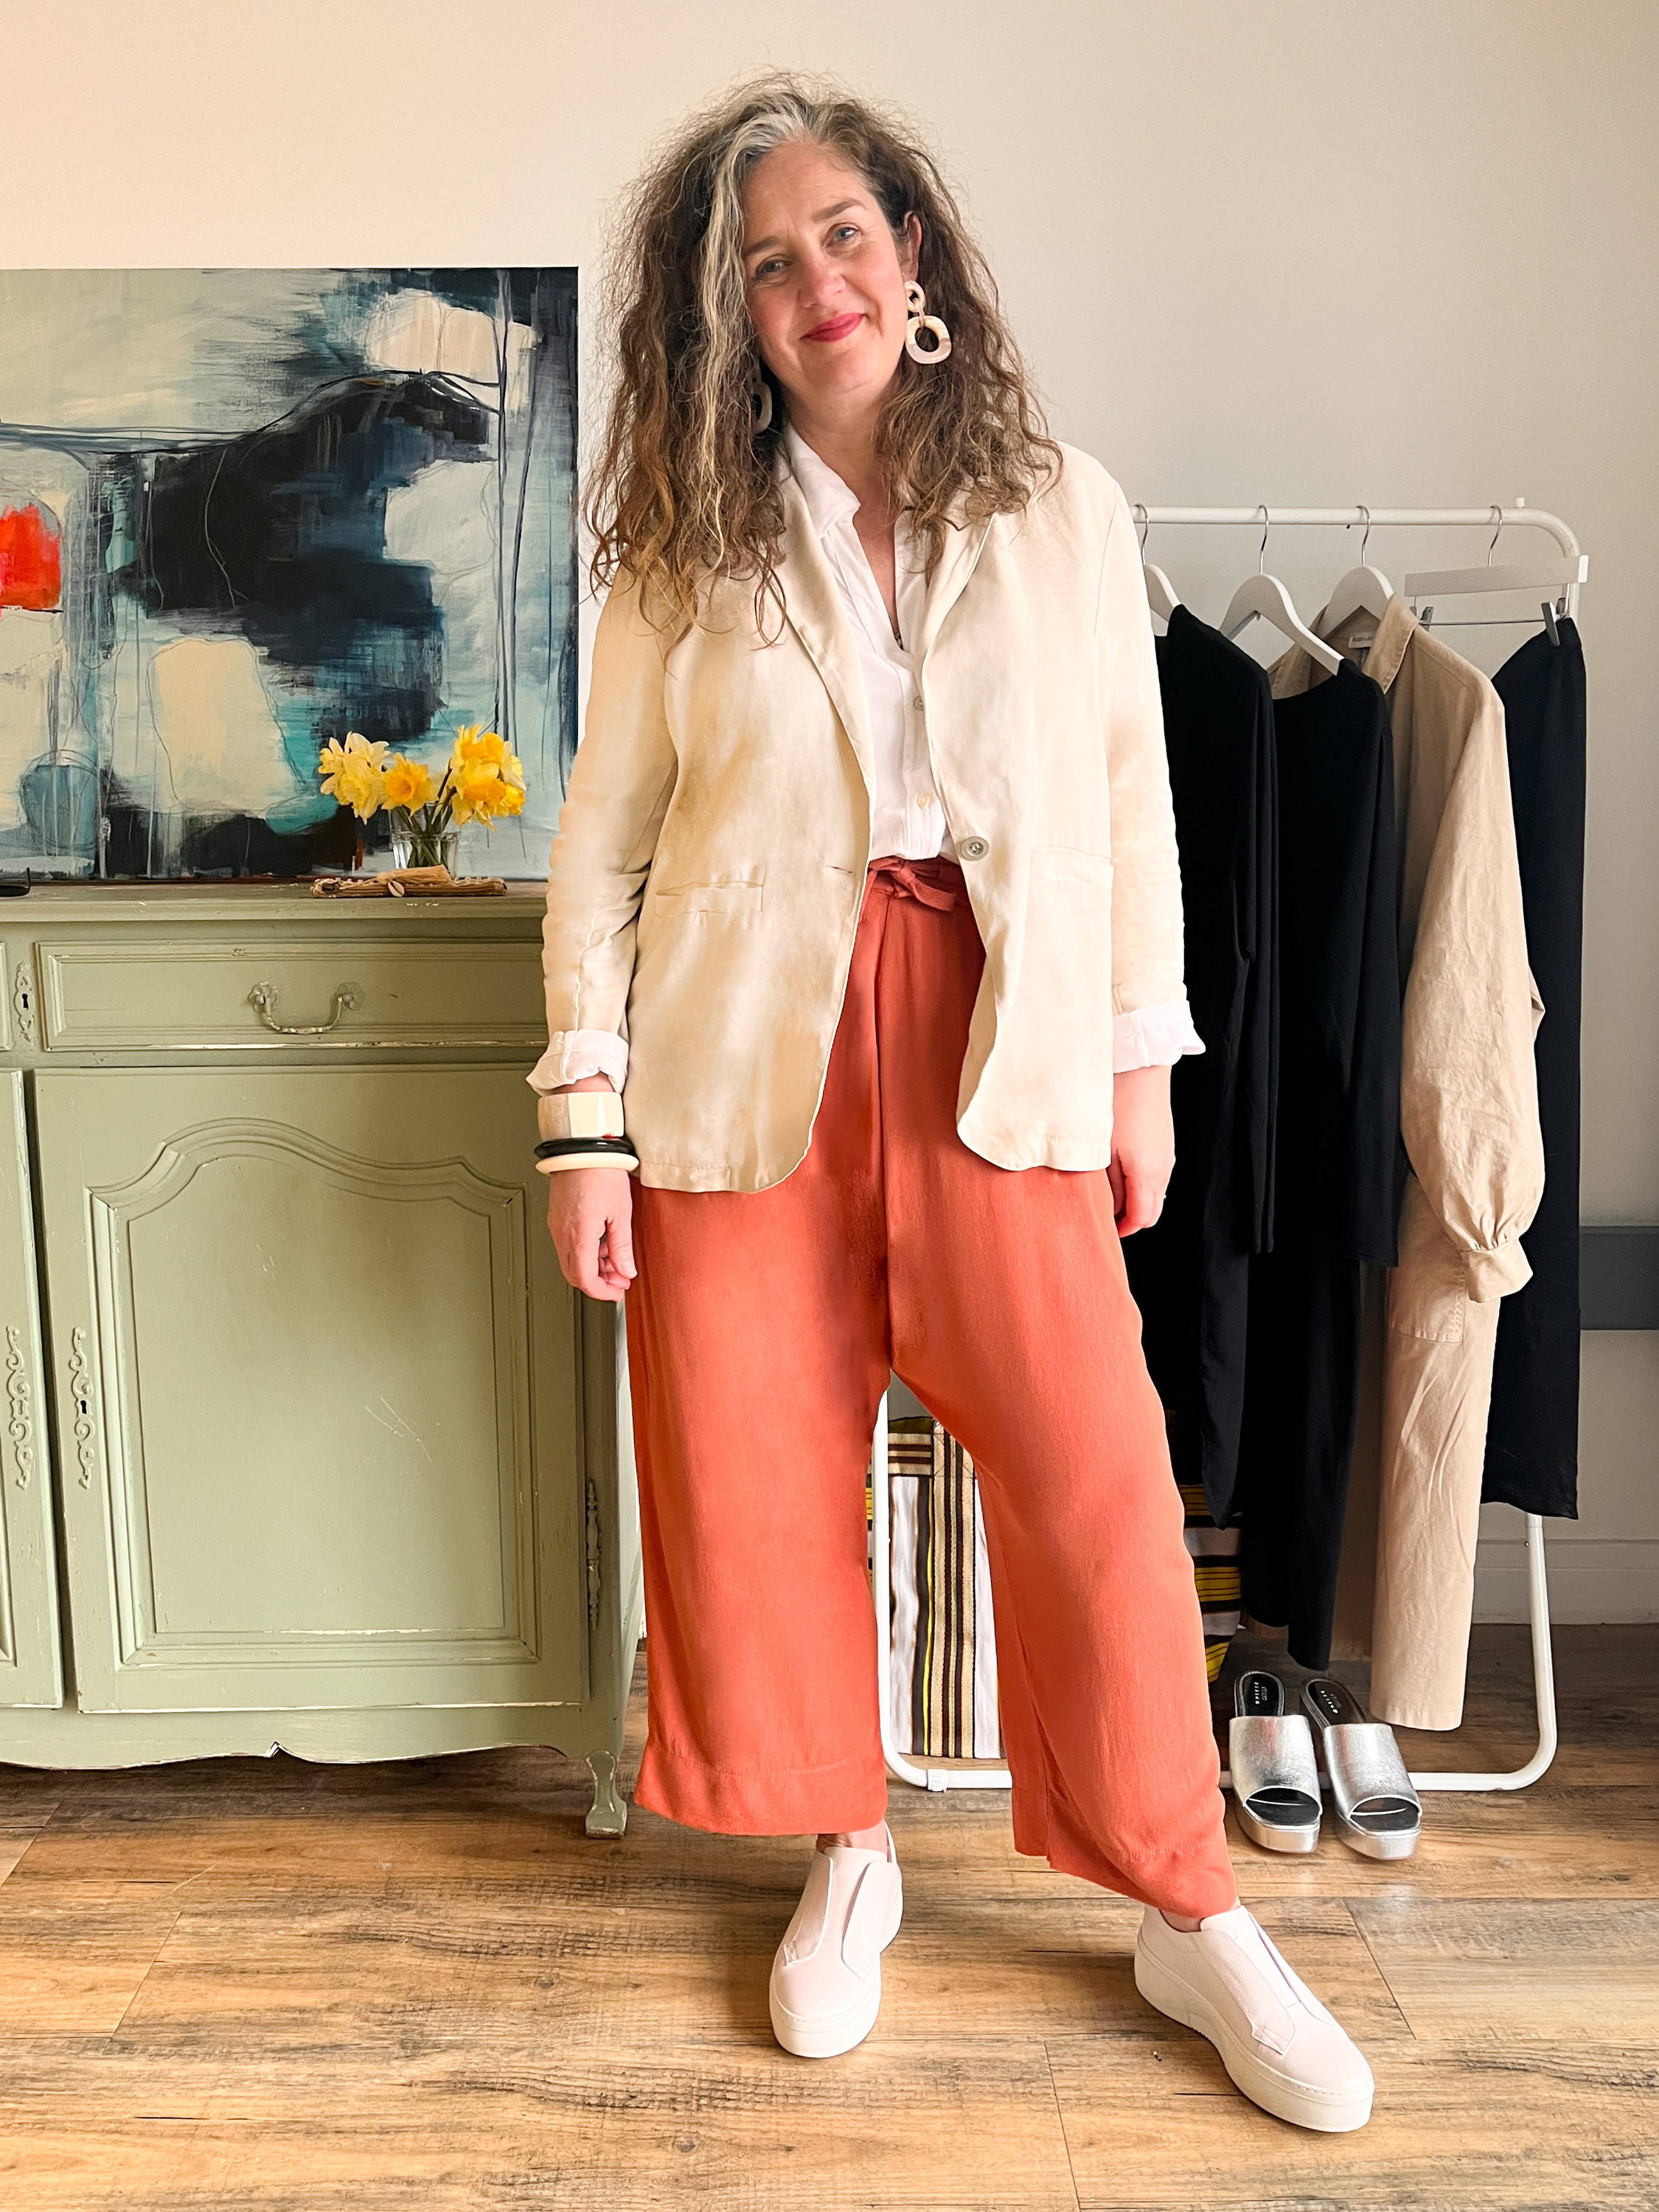 Emma wearing a cream jacket and terracotta drop-crotch trousers